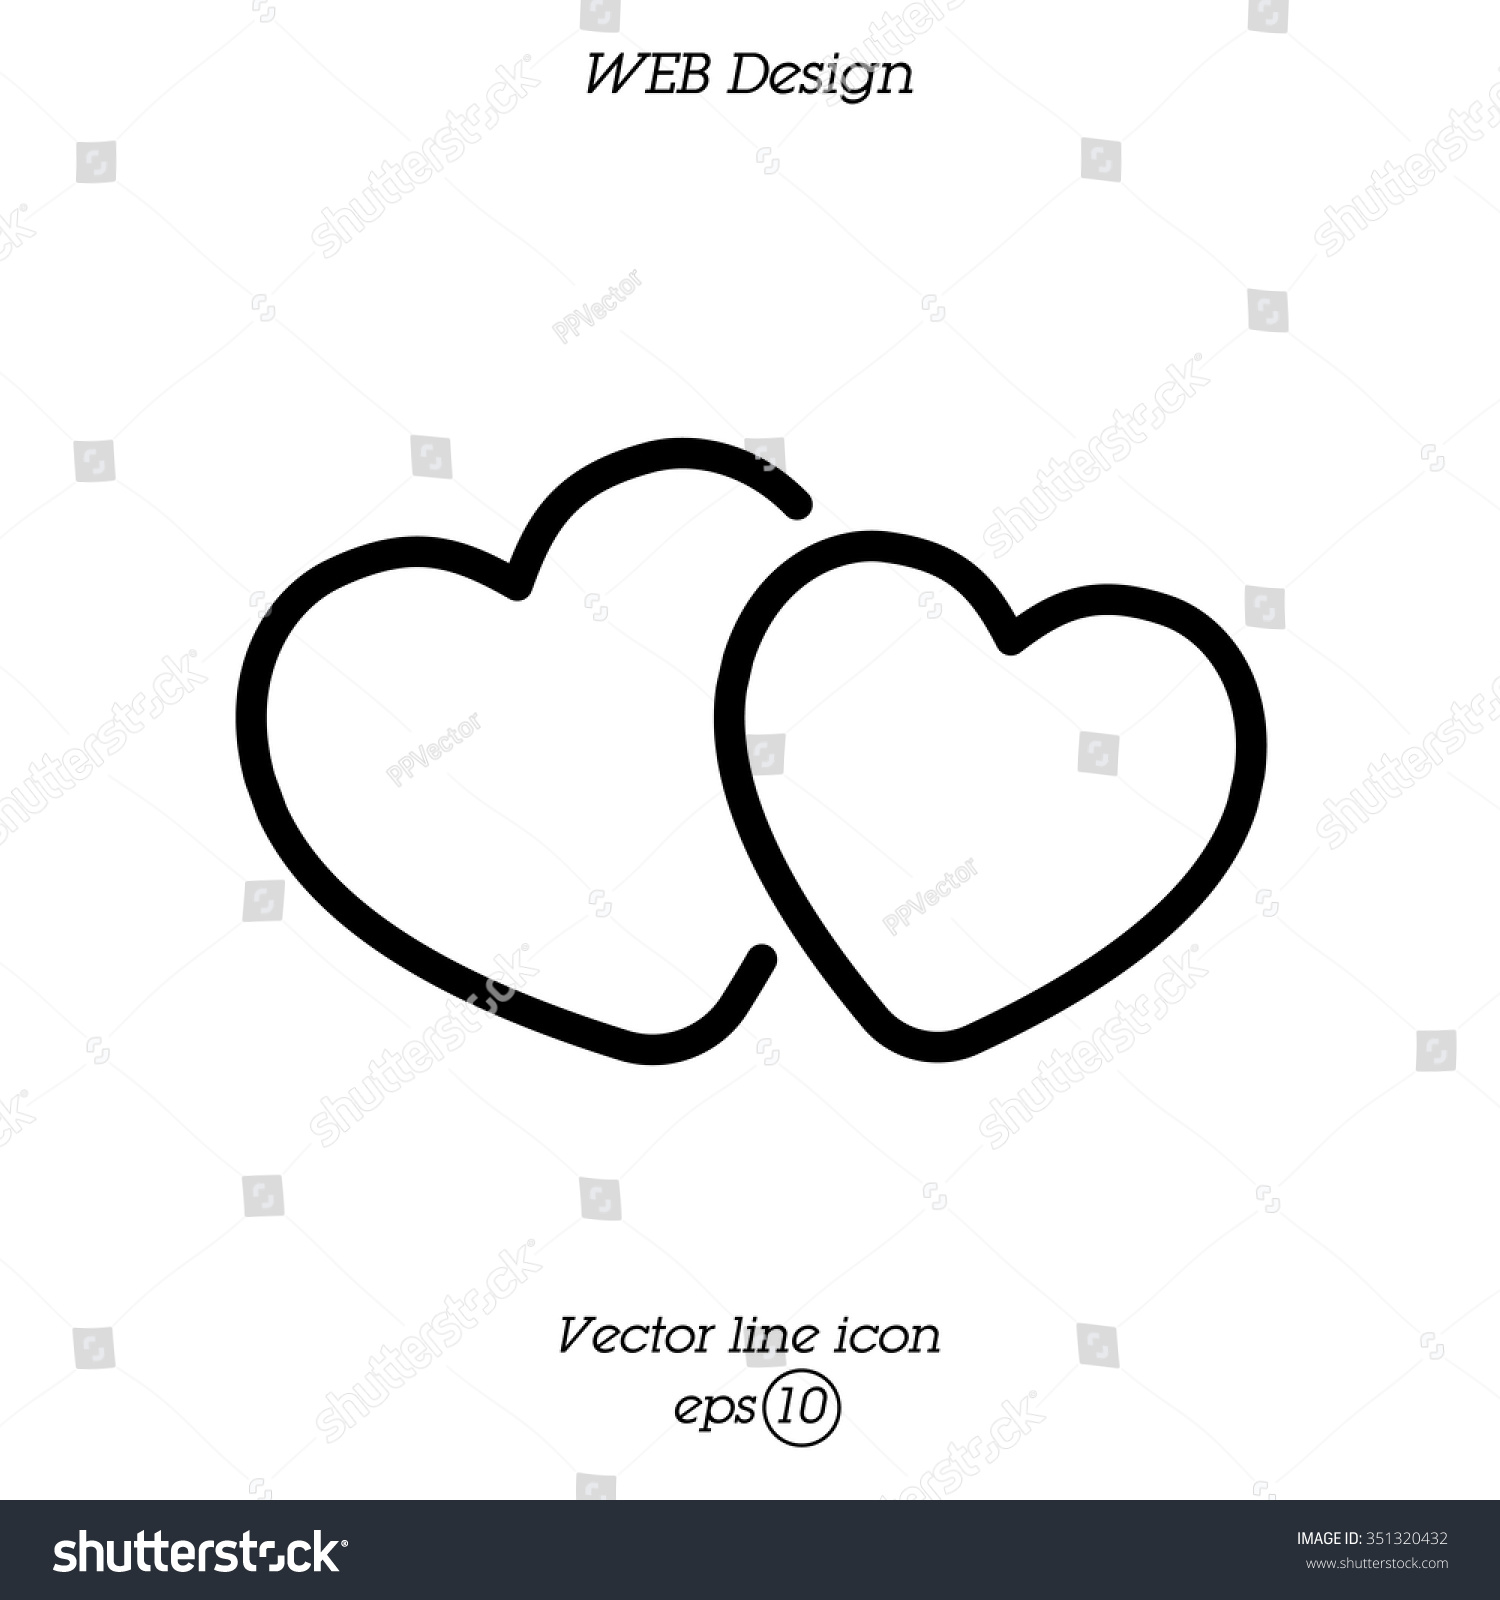 SVG of Web line icon. Two hearts. svg